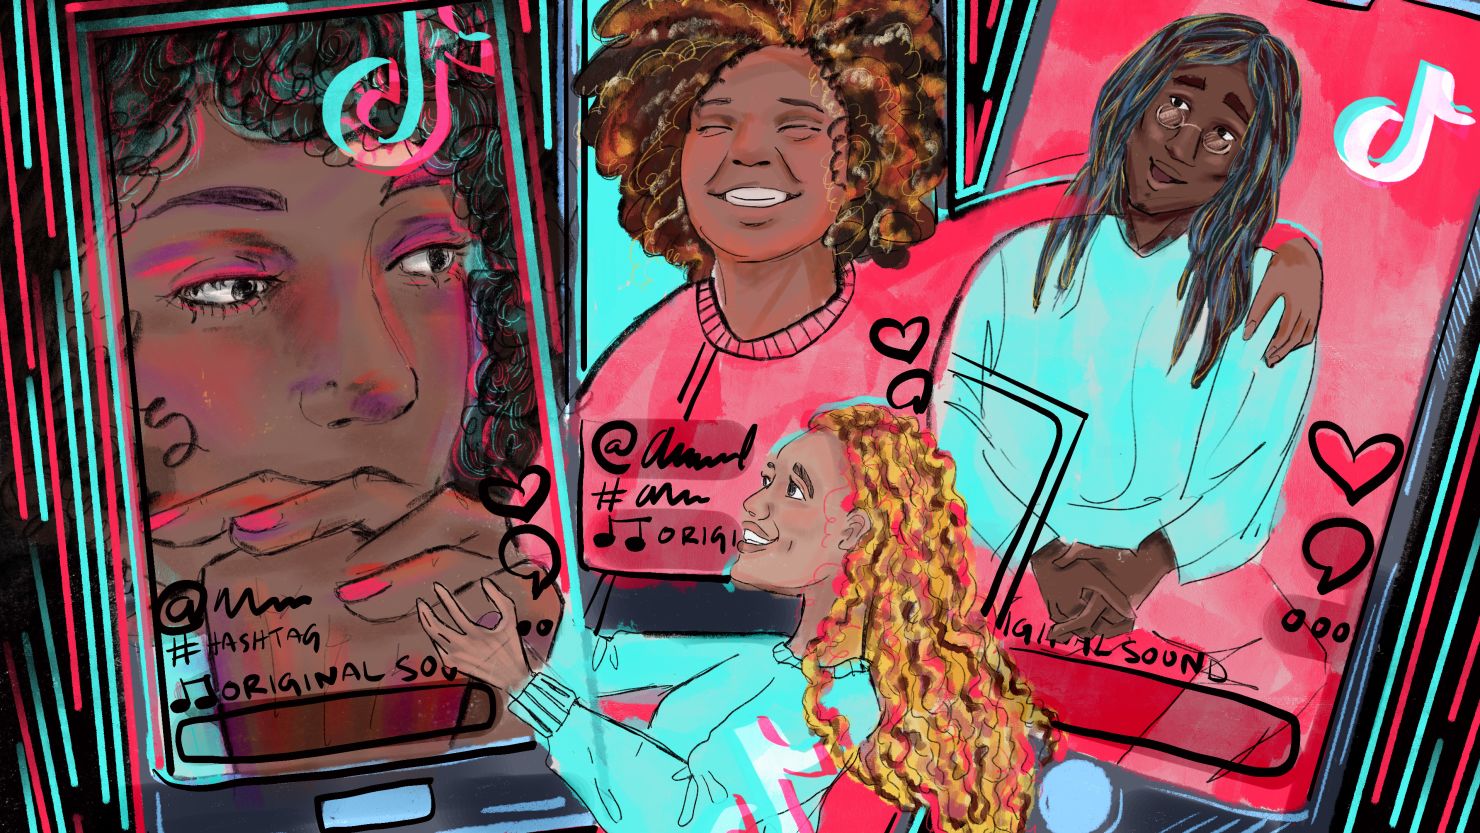 Black therapists on TikTok are creating safe spaces for people of color.